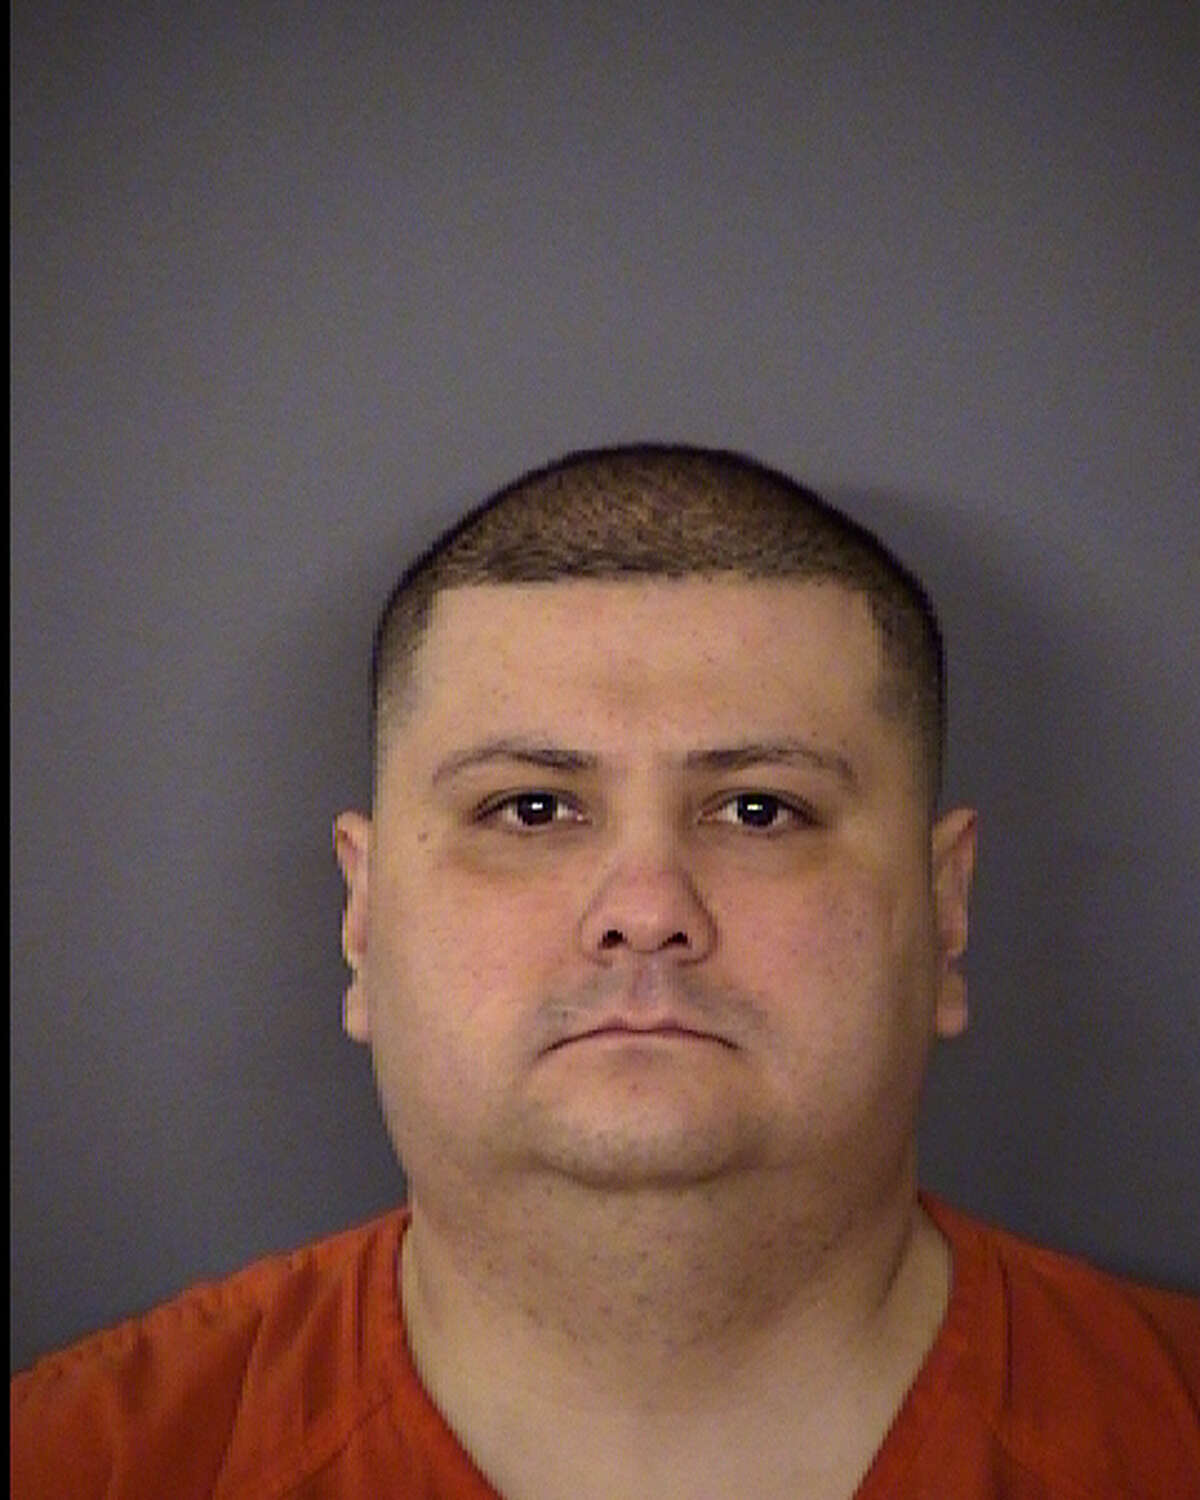 Gilbert Flores, 41, was shot and killed by members of the Bexar County Sheriff's Office following a domestic disturbance on Aug. 28.